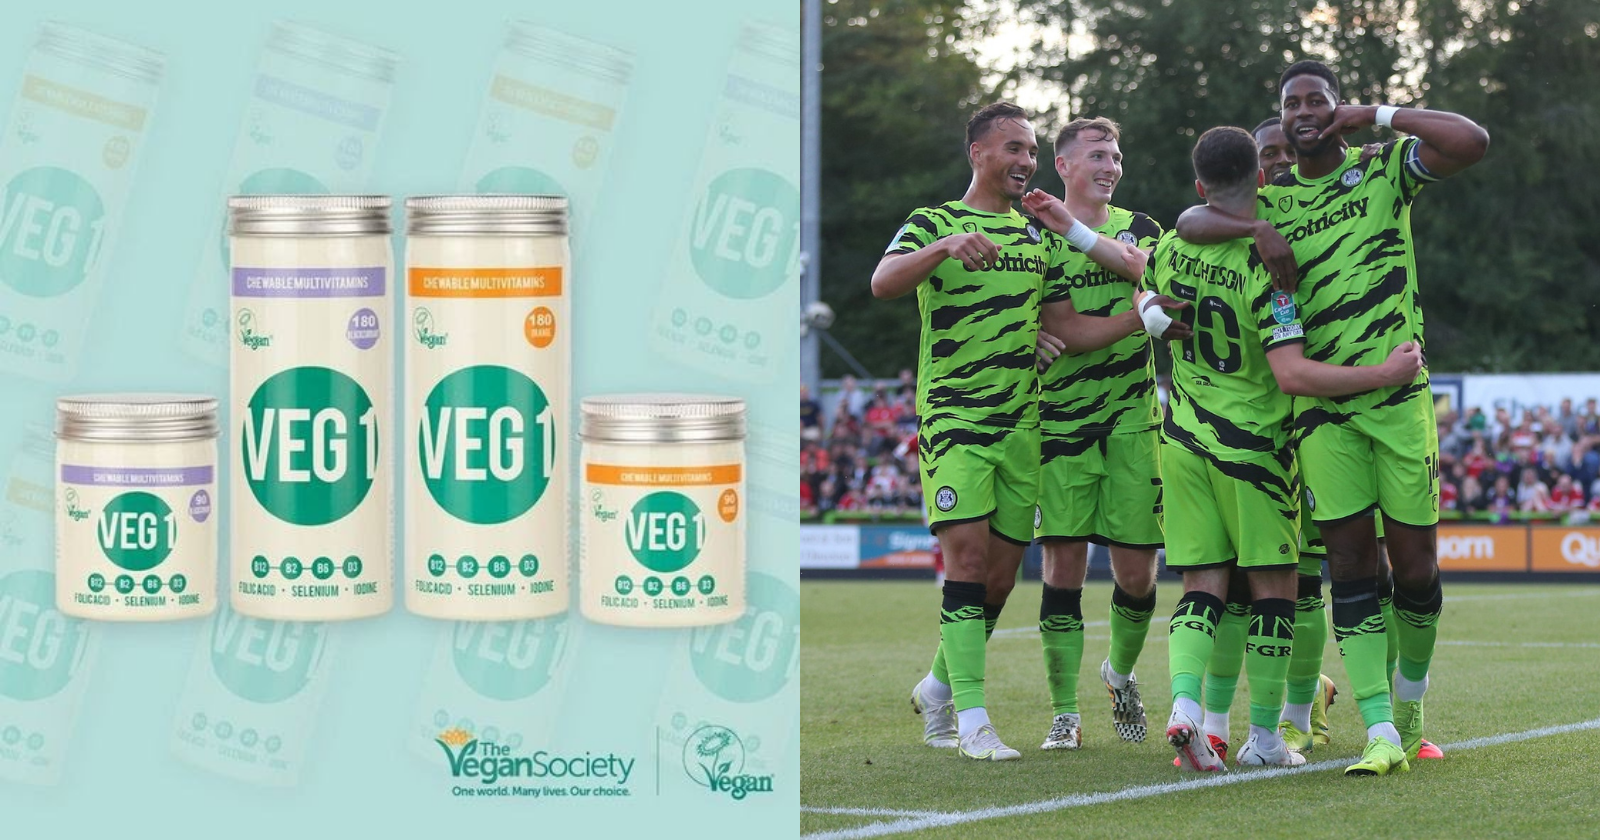 VEG1 becomes the official sponsor of the world's first 100% vegan football club